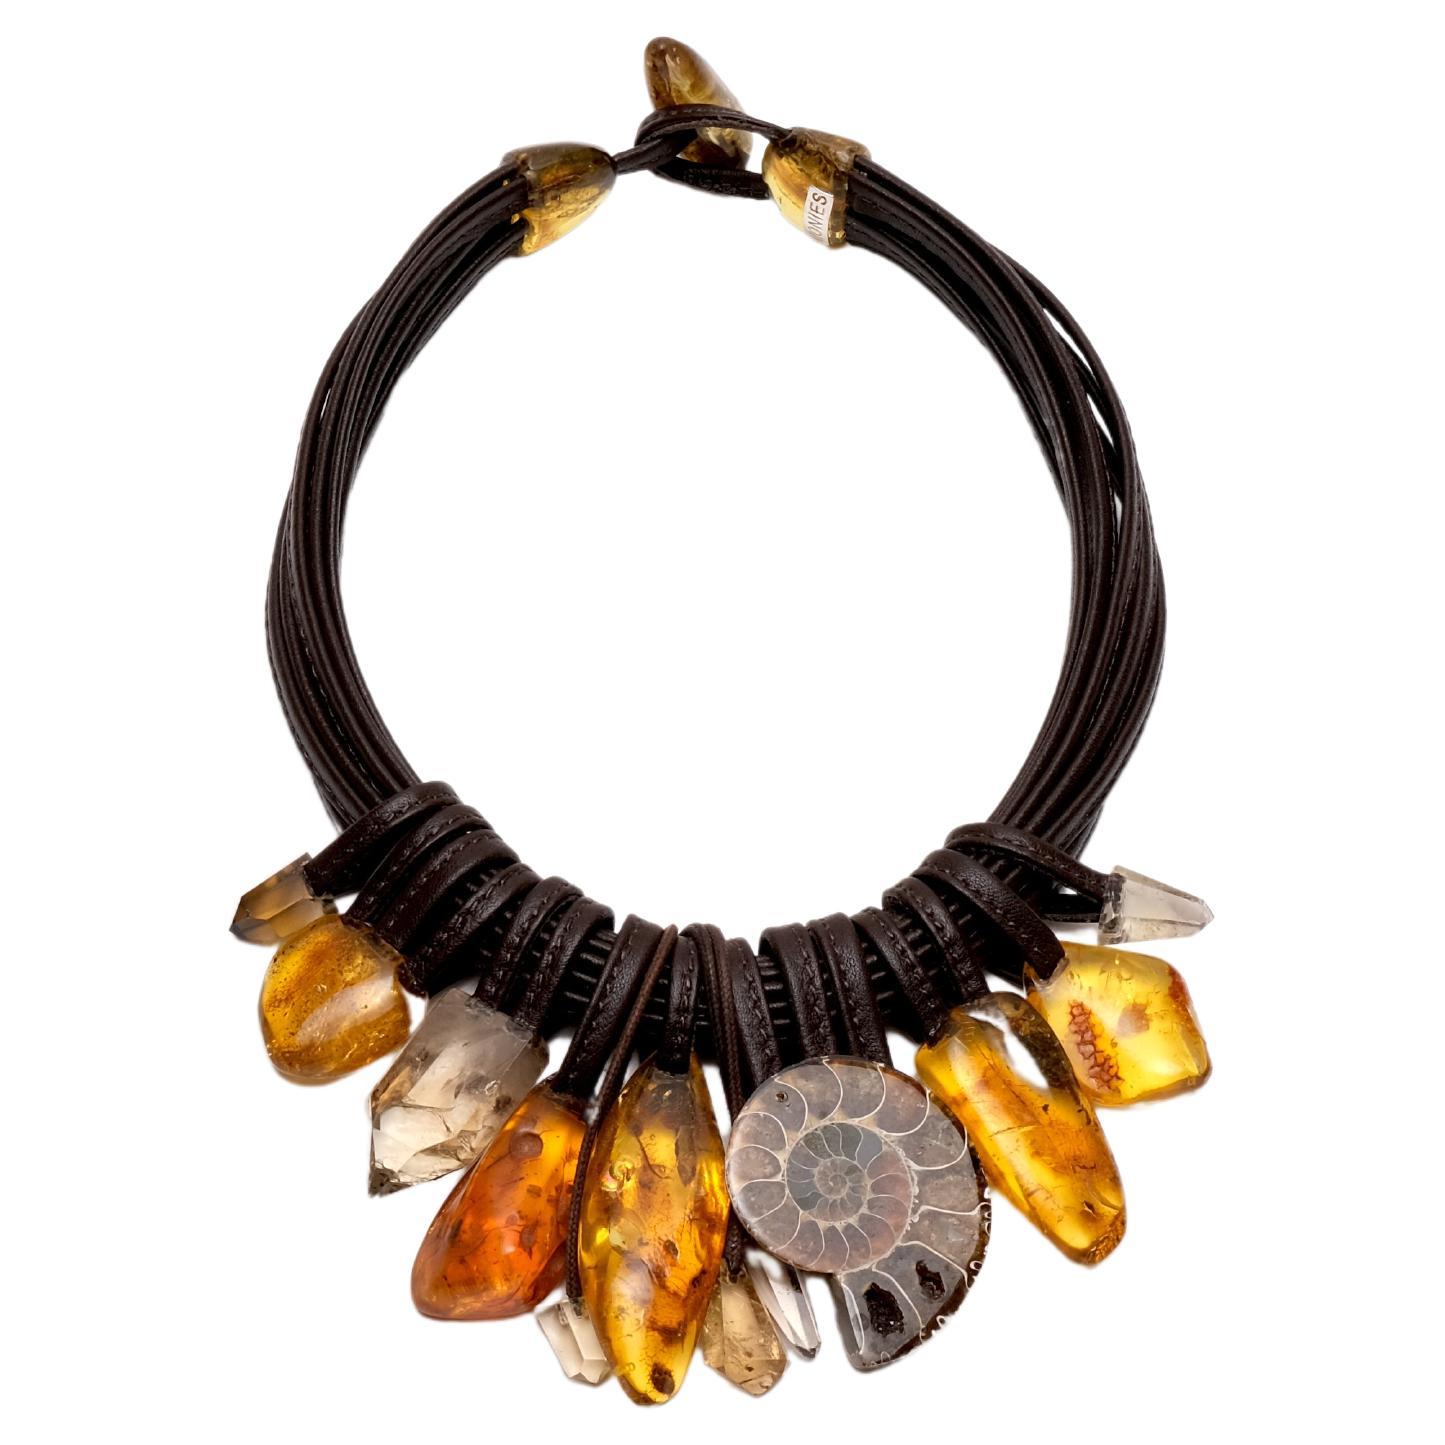 One-of-a-kind Necklace in Mixed Materials from the Danish Brand